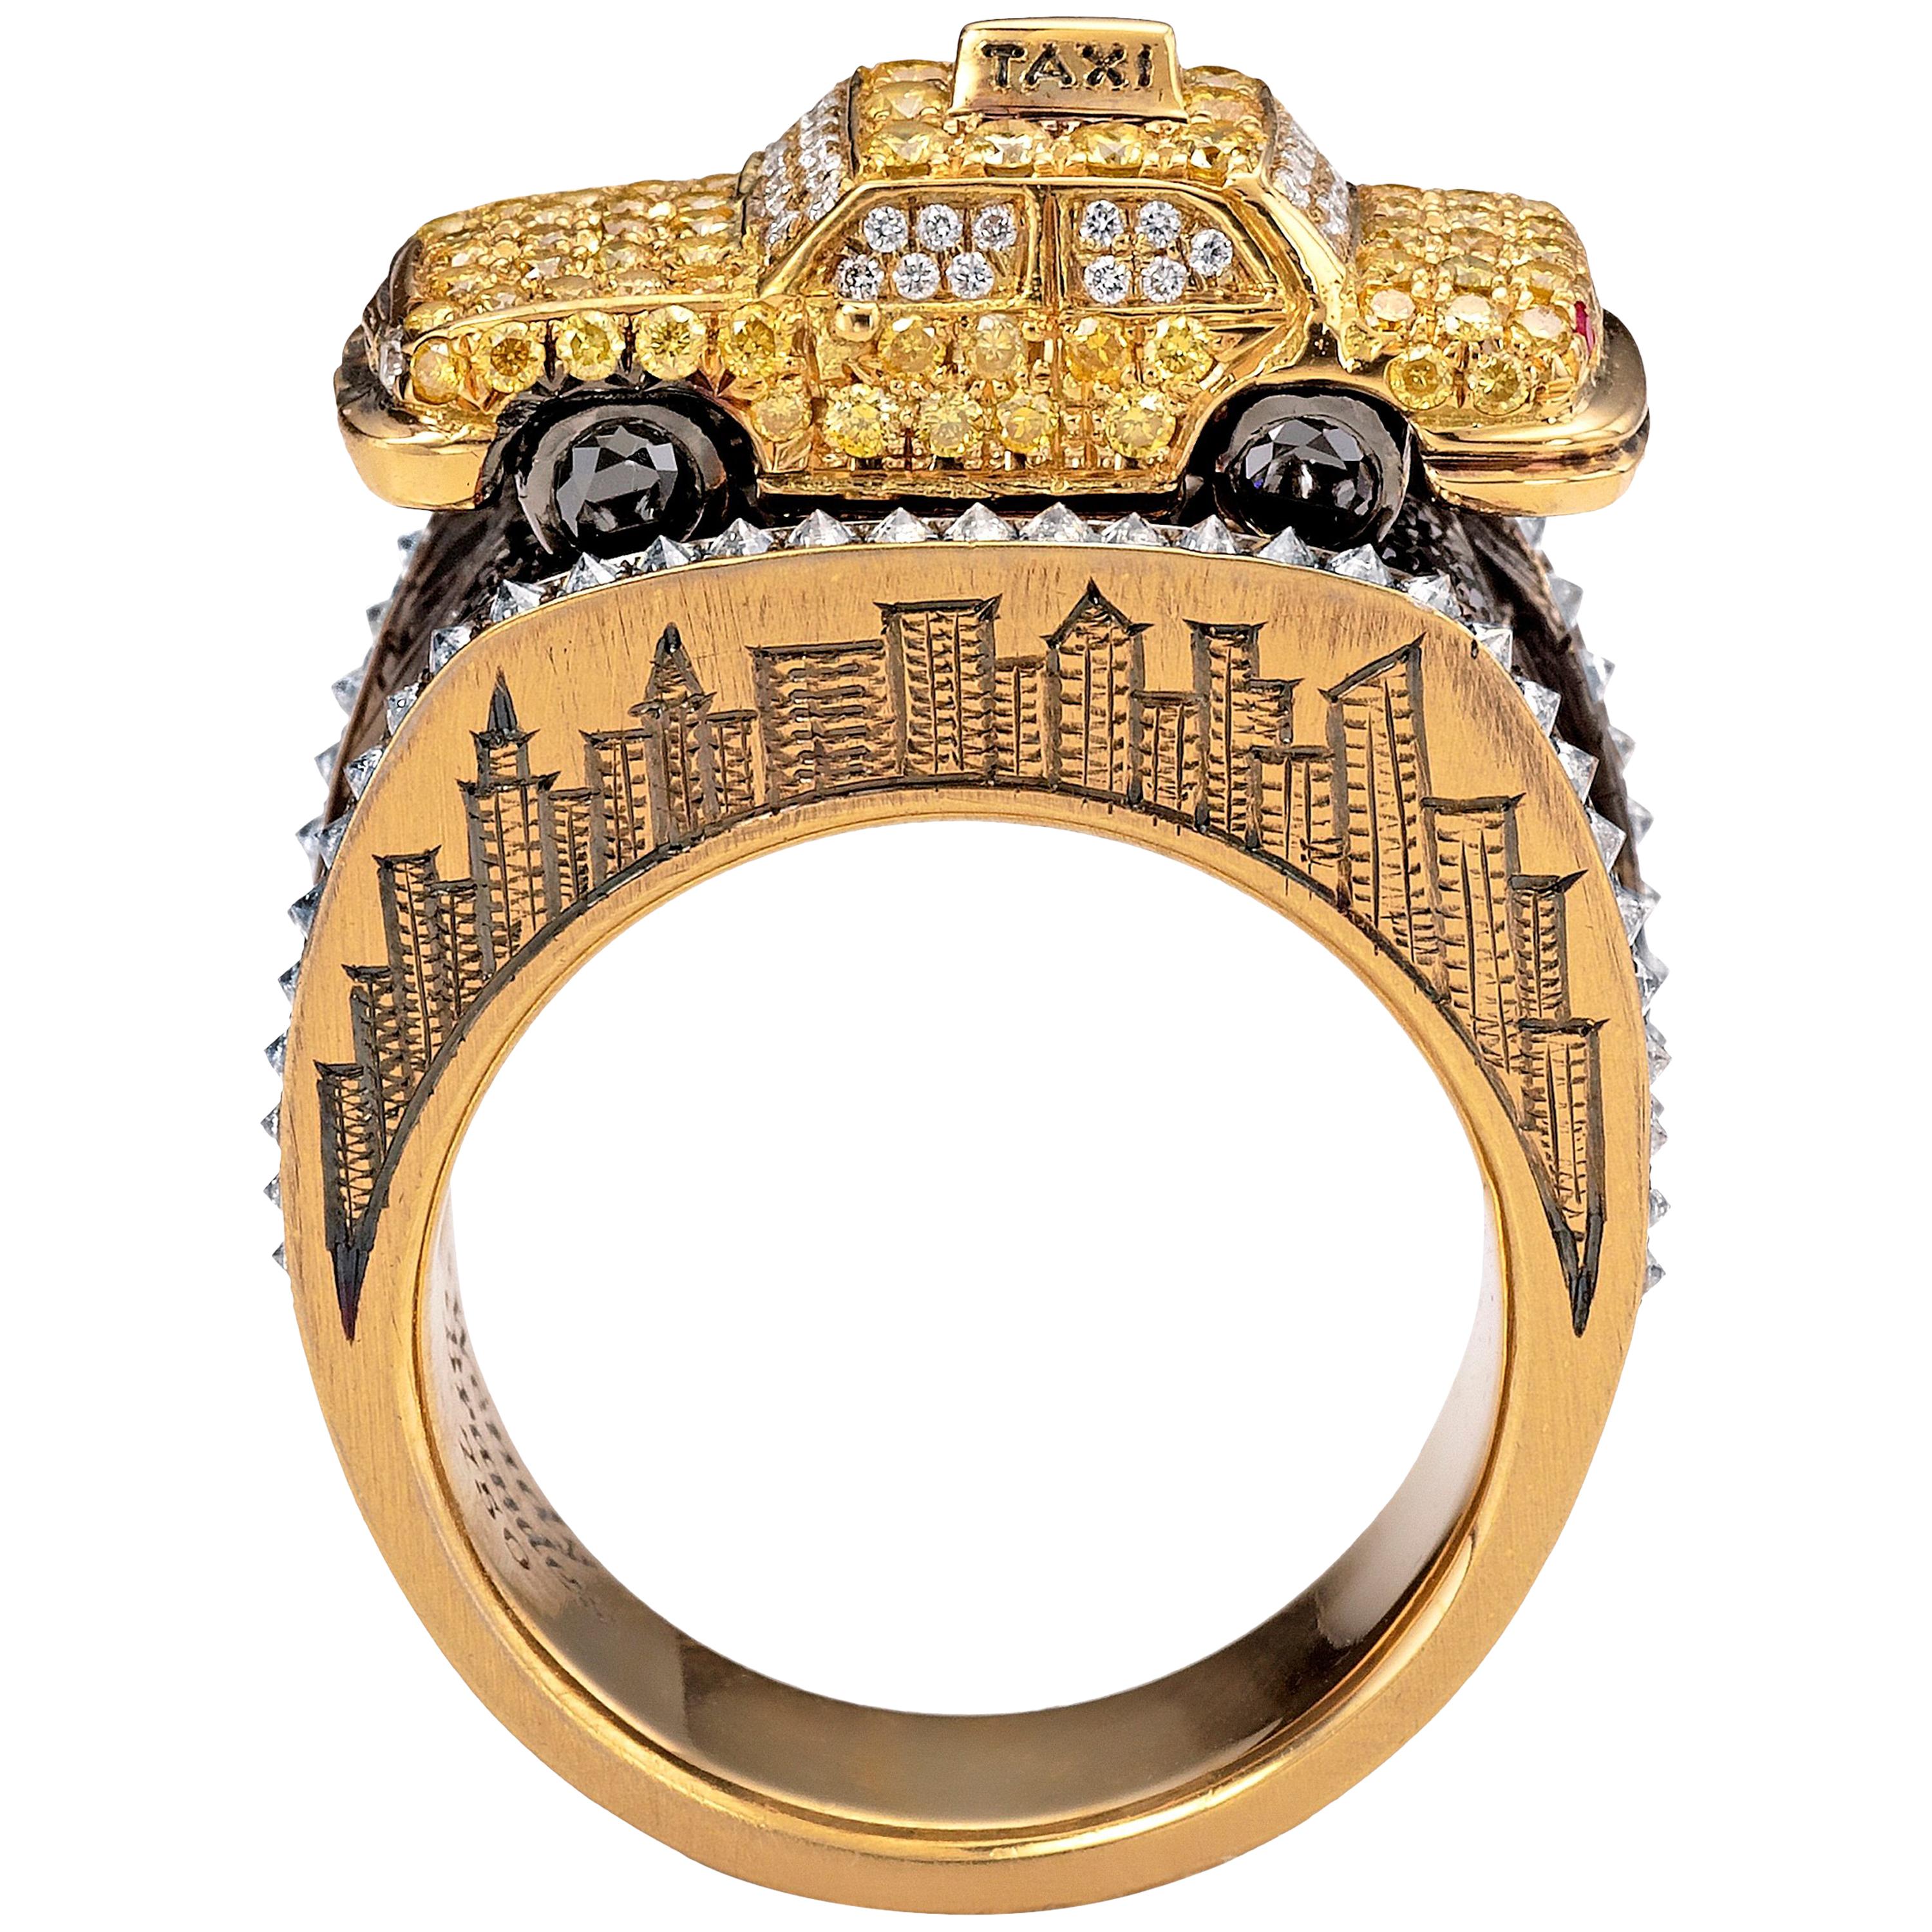 Wendy Brandes Signed Maneater Collection Ring: New York City Taxi and Passenger